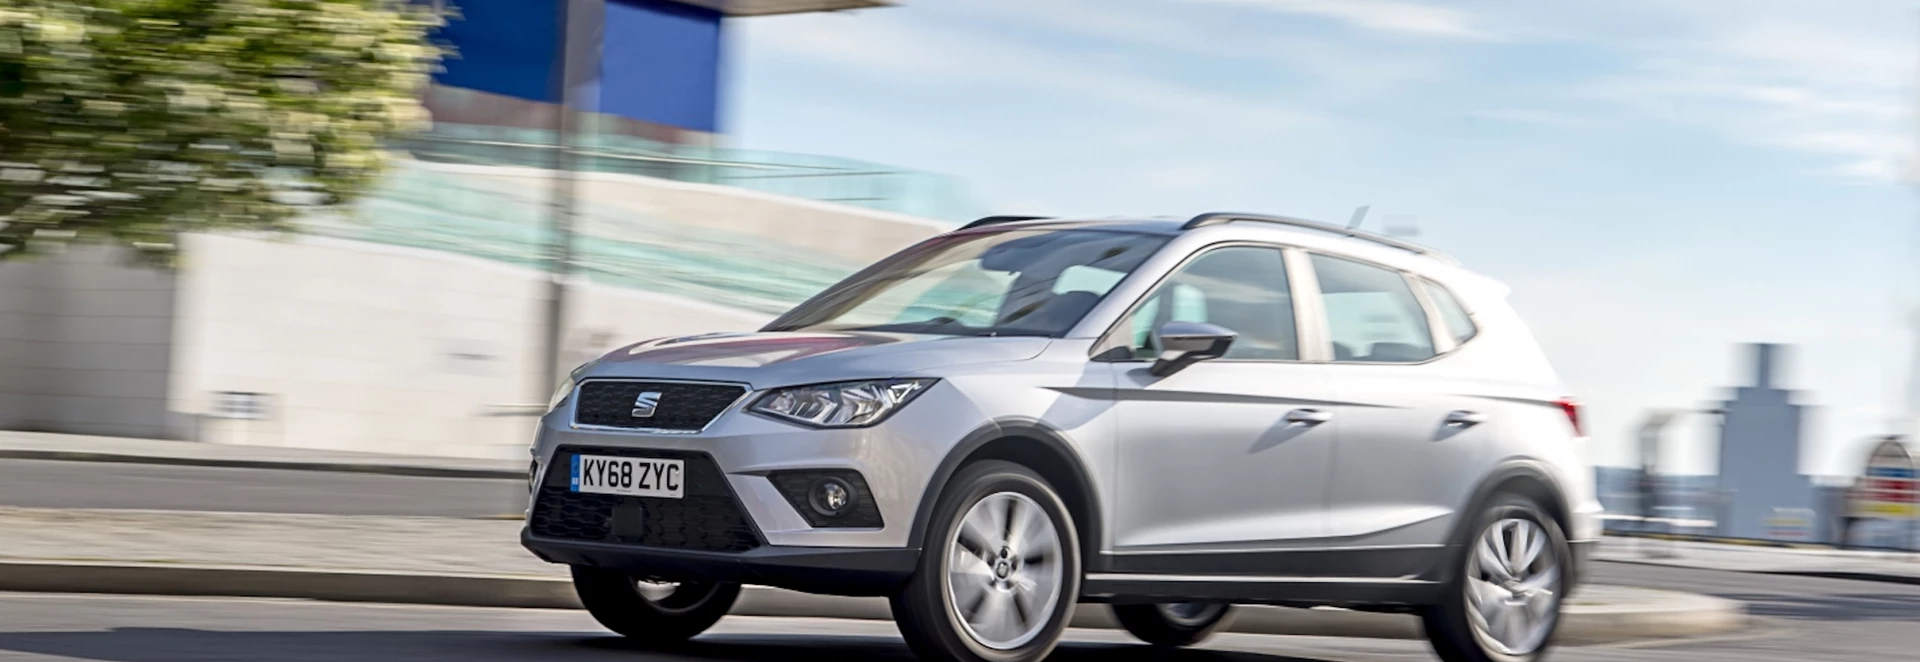 Seat Arona scores strong in latest Green NCAP testing